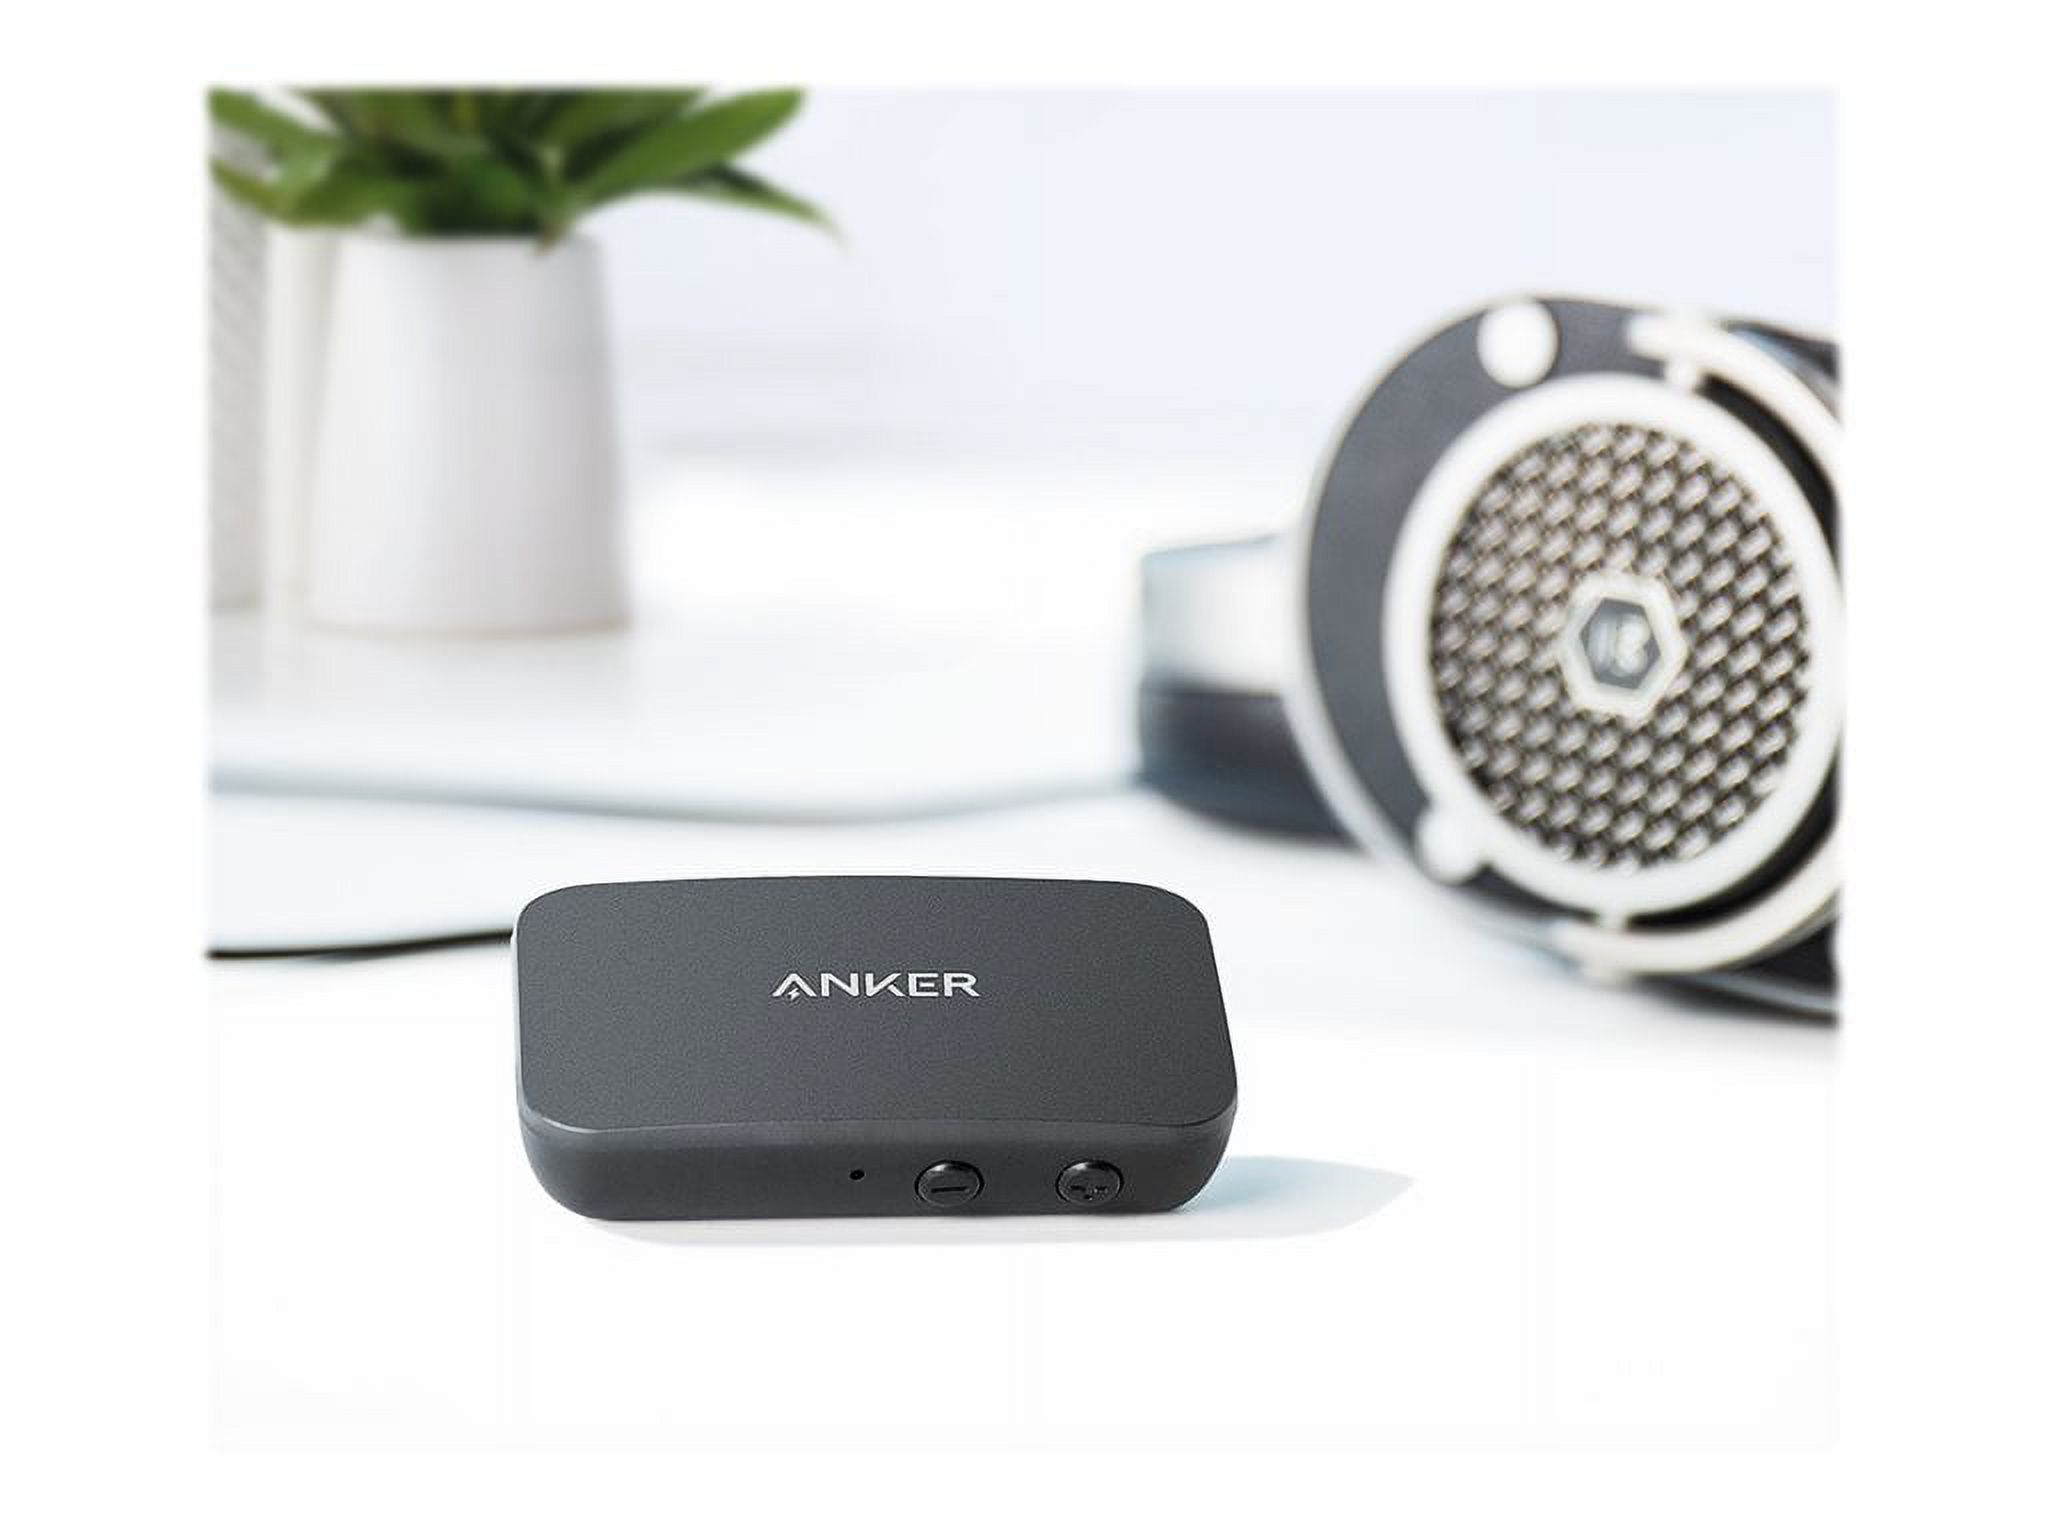 Anker Soundsync A3352 Bluetooth Receiver for Music Streaming with Bluetooth 5.0, 12-Hour Battery Life, Handsfree Calls, Dual Device Connection, for Car, Home Stereo, Headphones, Speakers - image 5 of 5